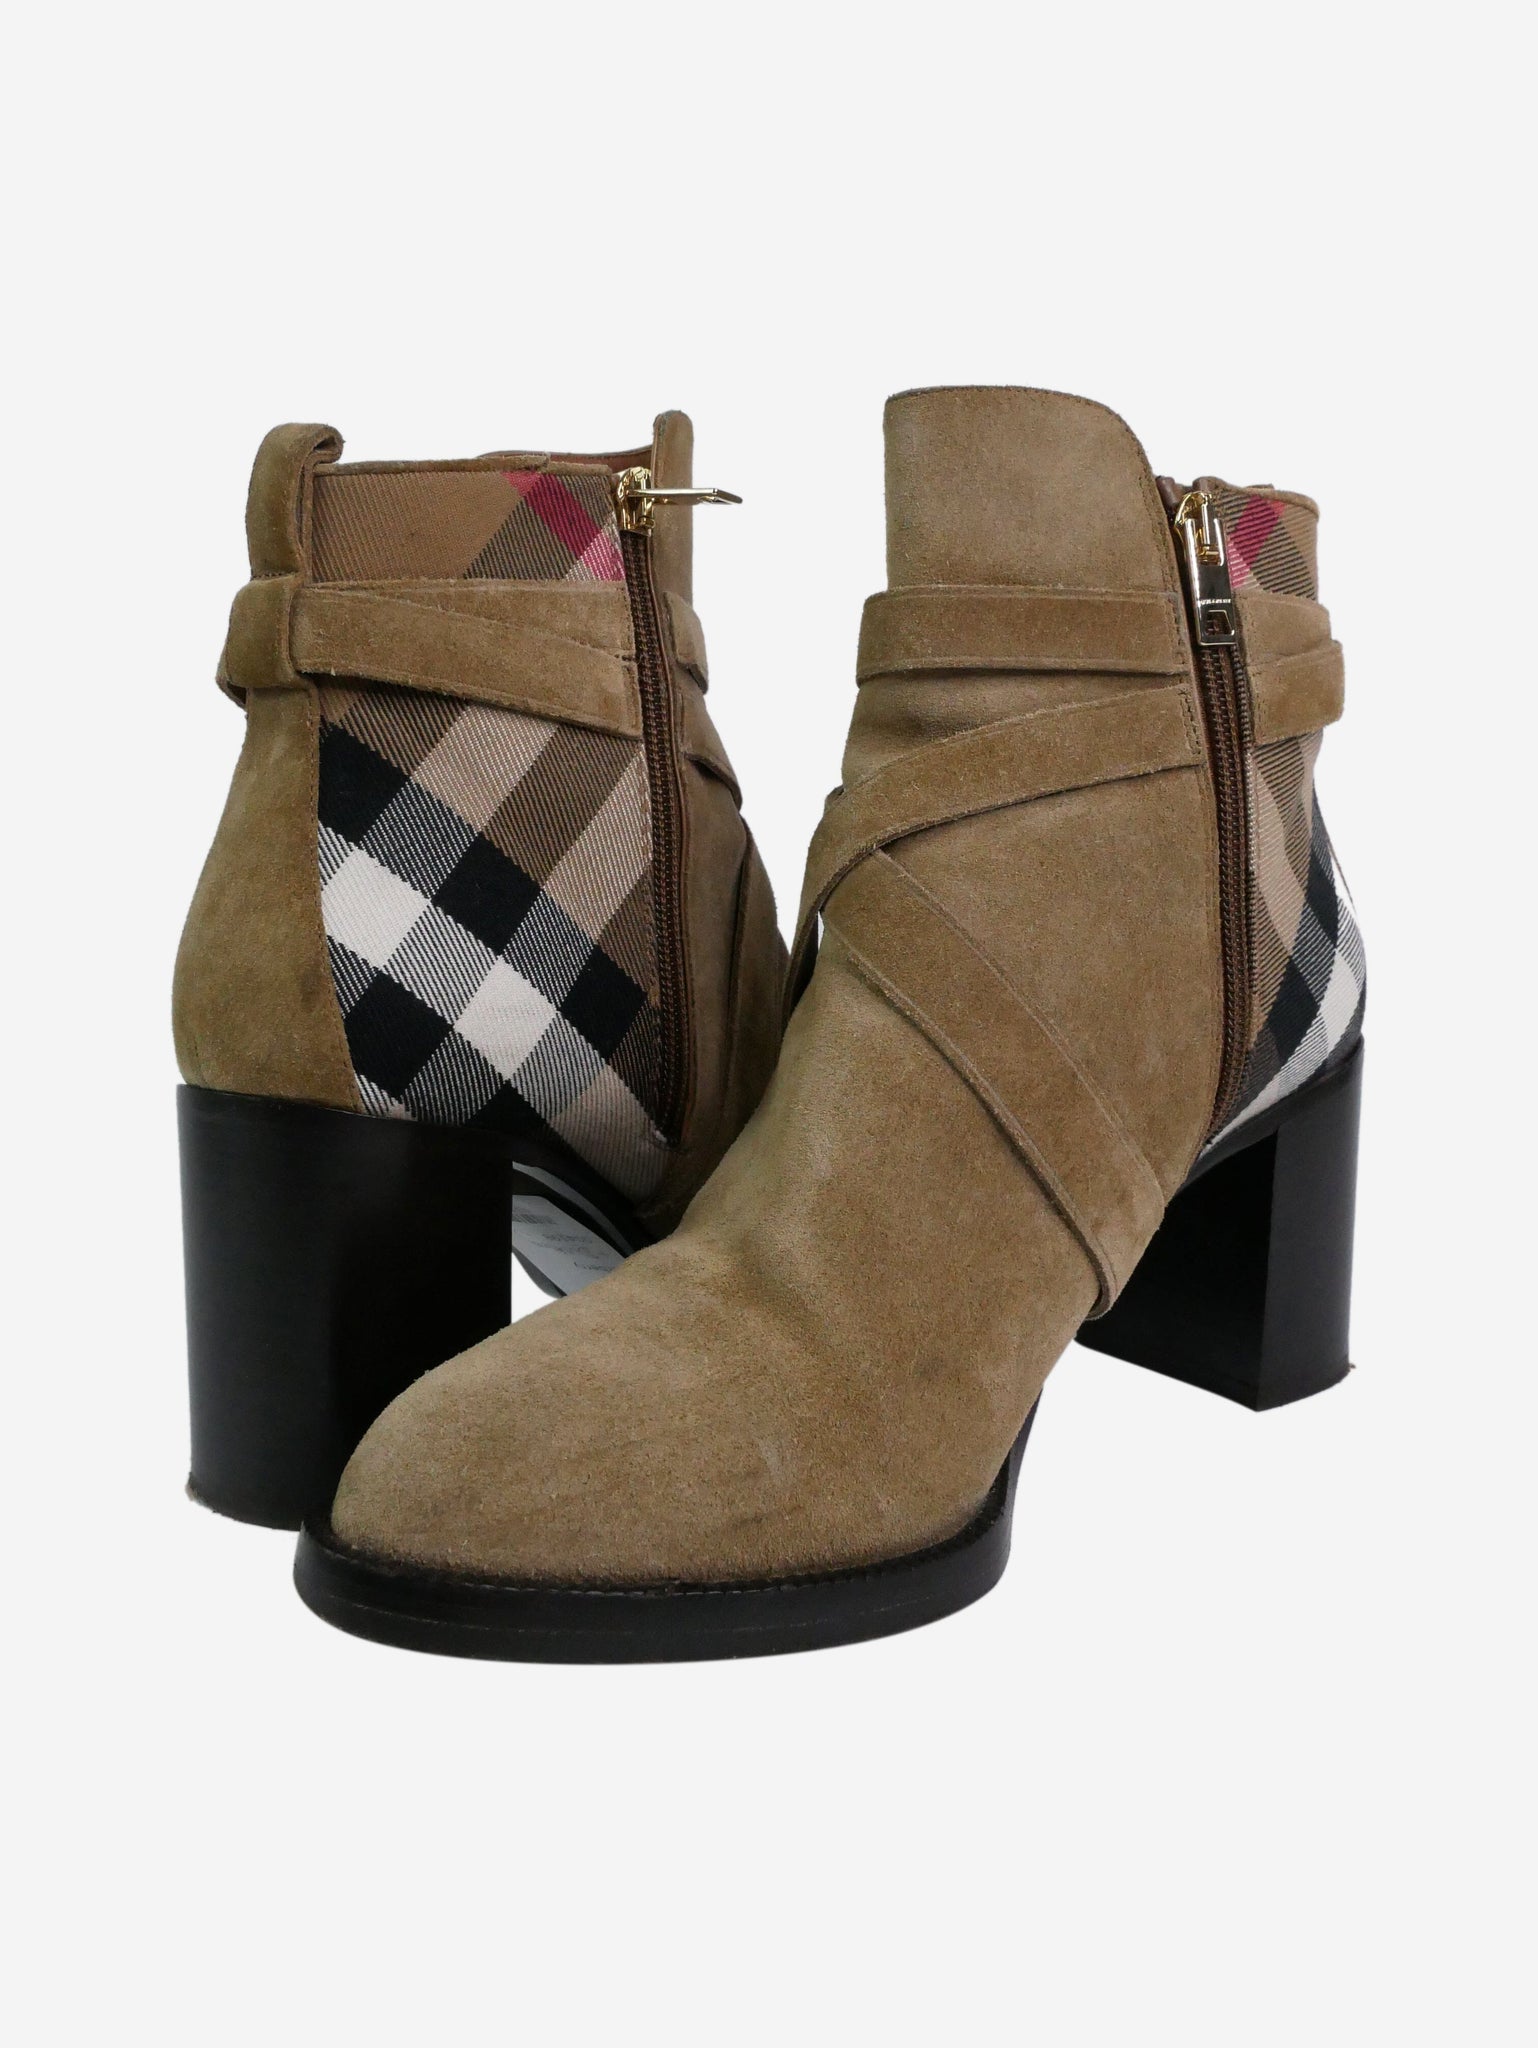 Burberry pre-owned neutral suede heeled ankle boots | SOTT